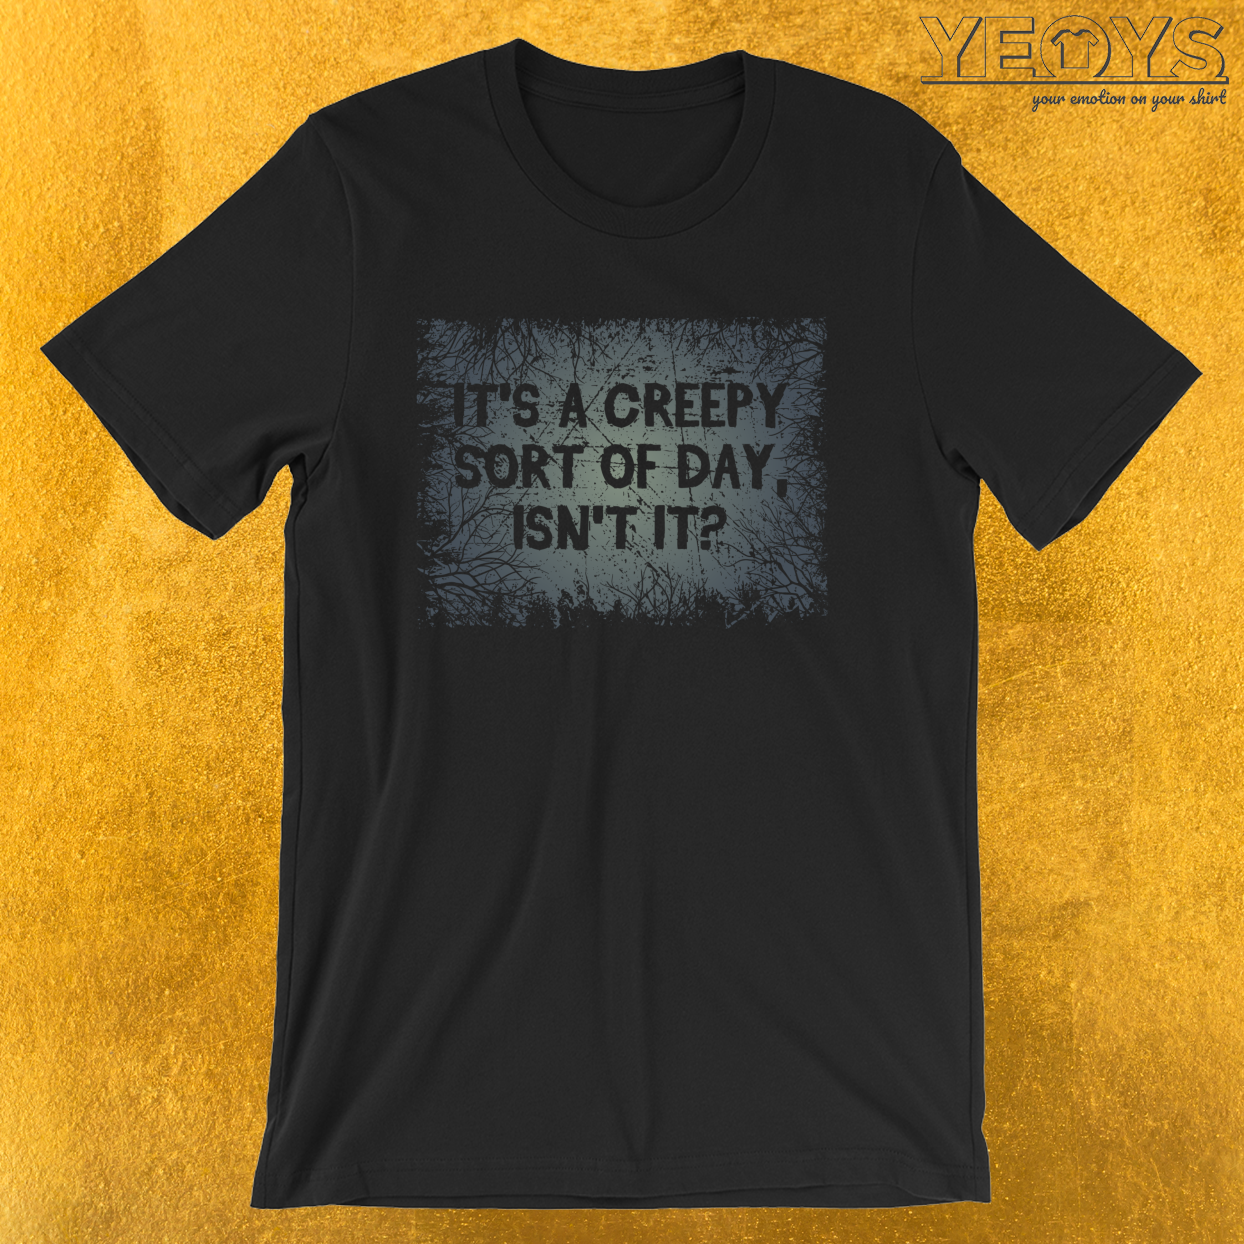 It’s A Creepy Sort Of Day Isn’t It – Funny Horror Movie Tee